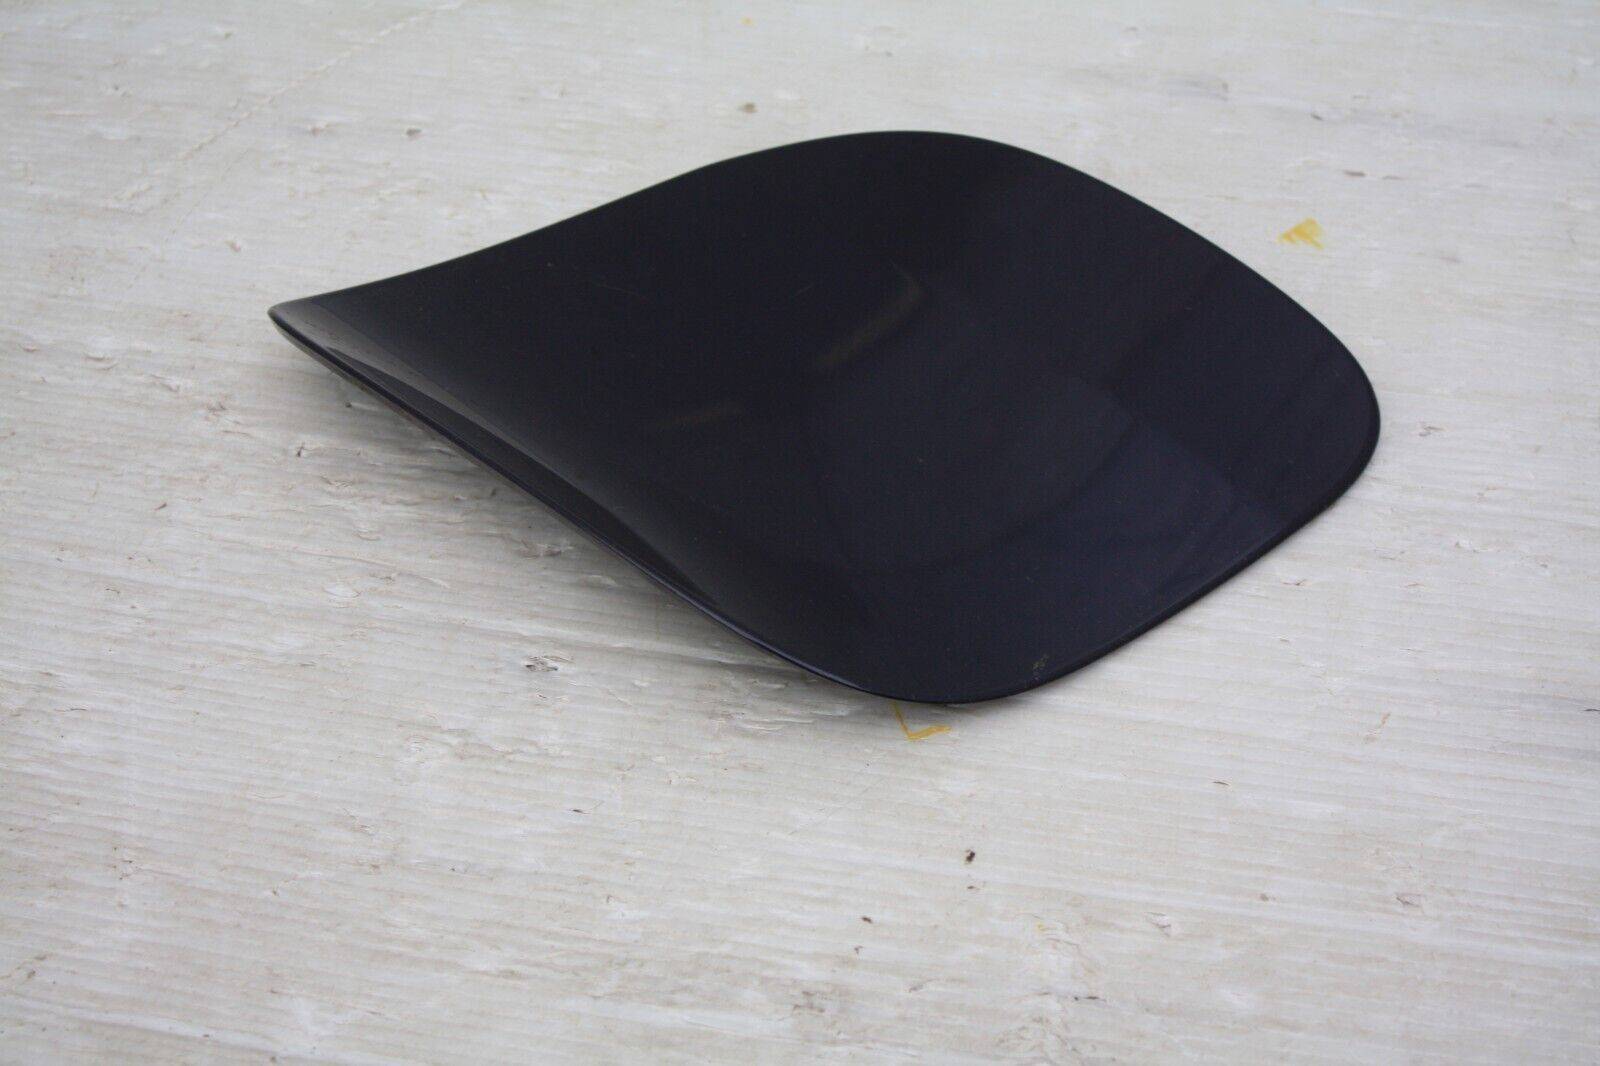 Mercedes-C-Class-S205-Fuel-Tank-Filler-Flap-Cover-2015-TO-2018-A2058850126-175916084583-2